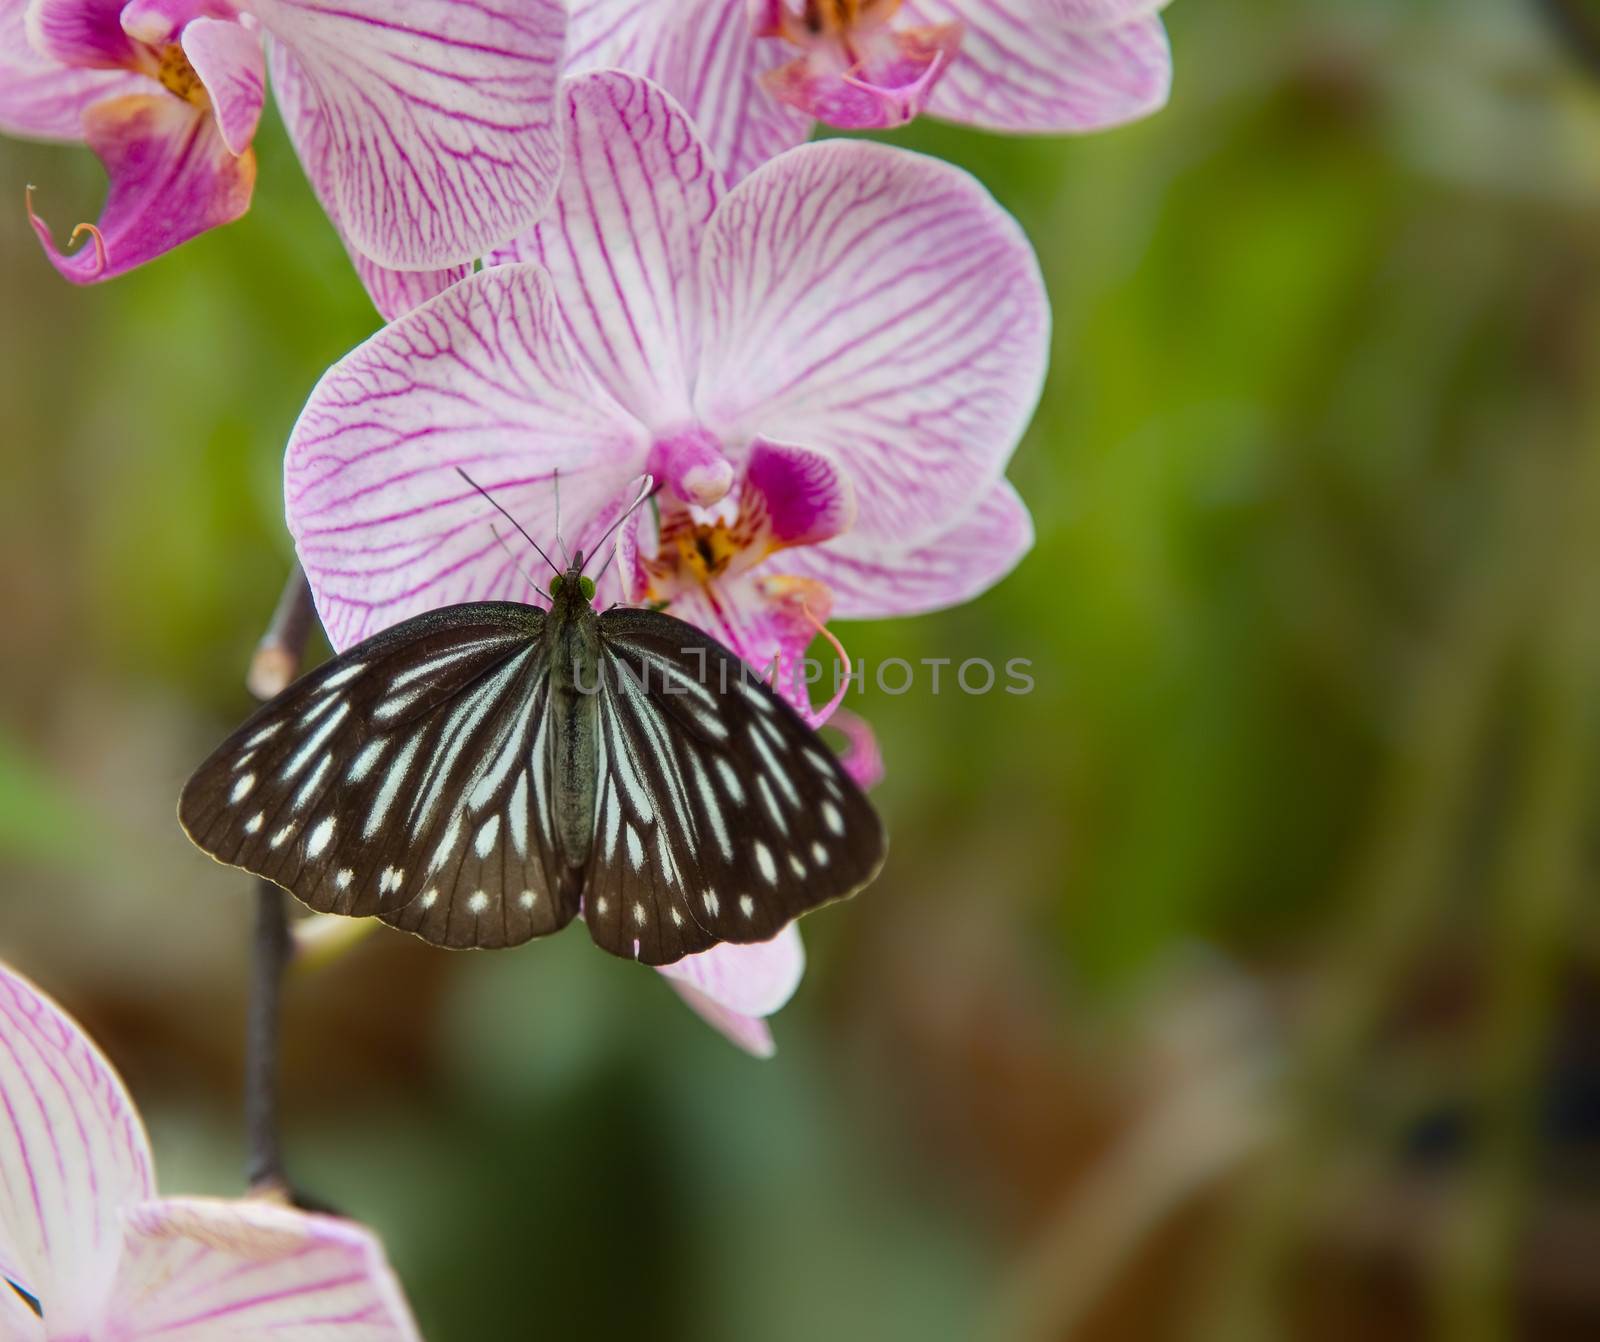 Beautiful Orchid with butterfly by foryouinf